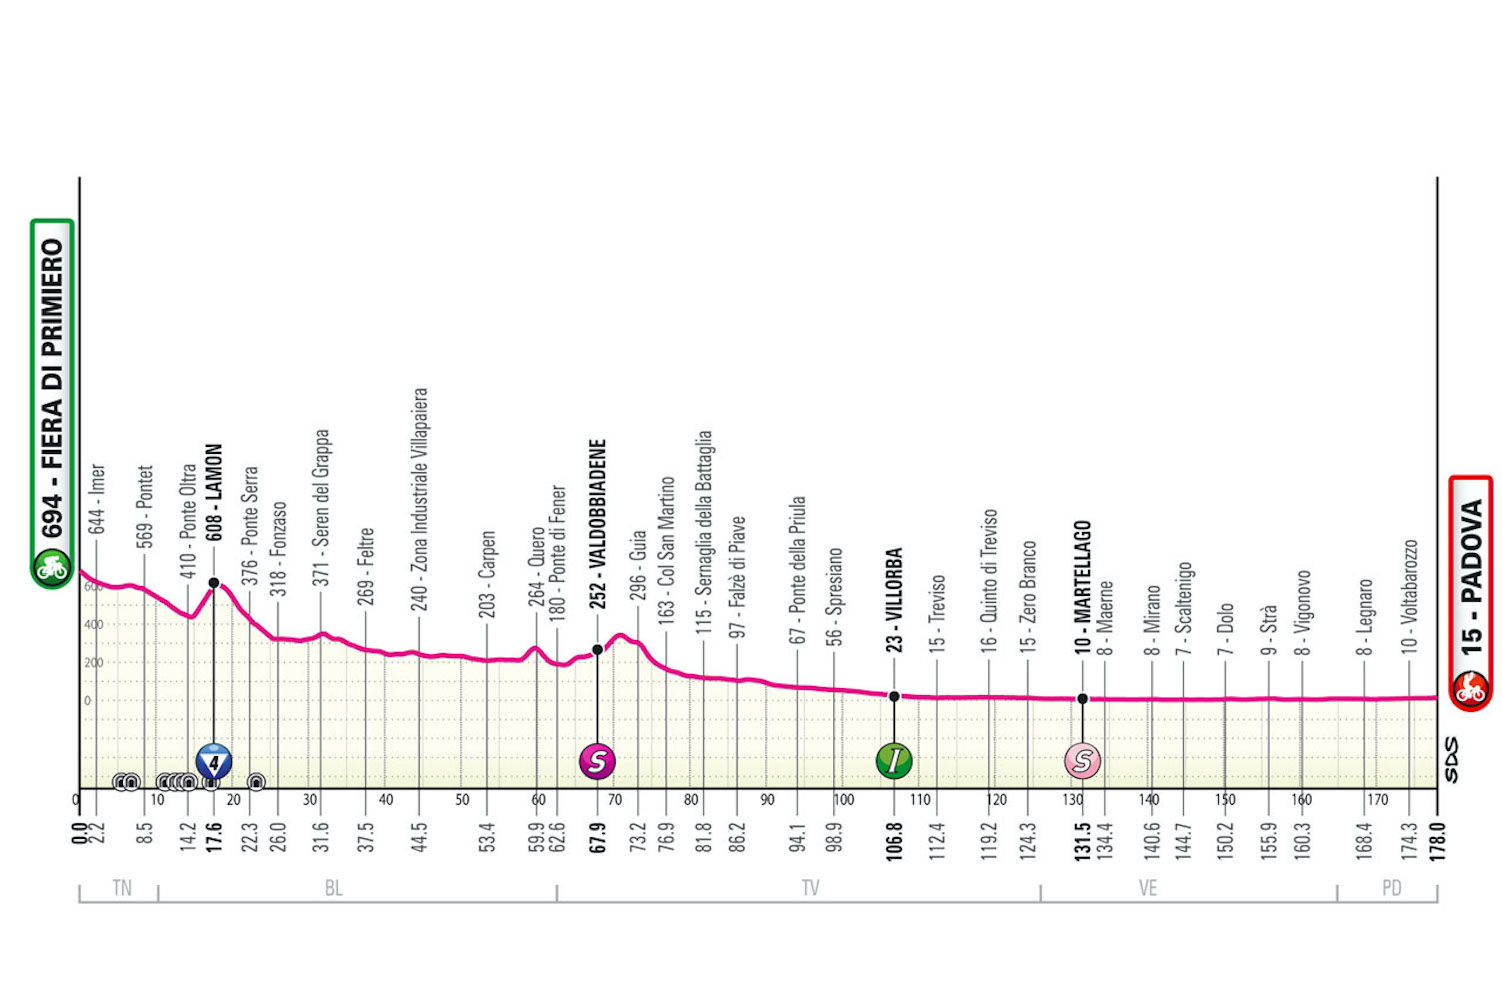 The route of stage 18 of the Giro d'Italia.